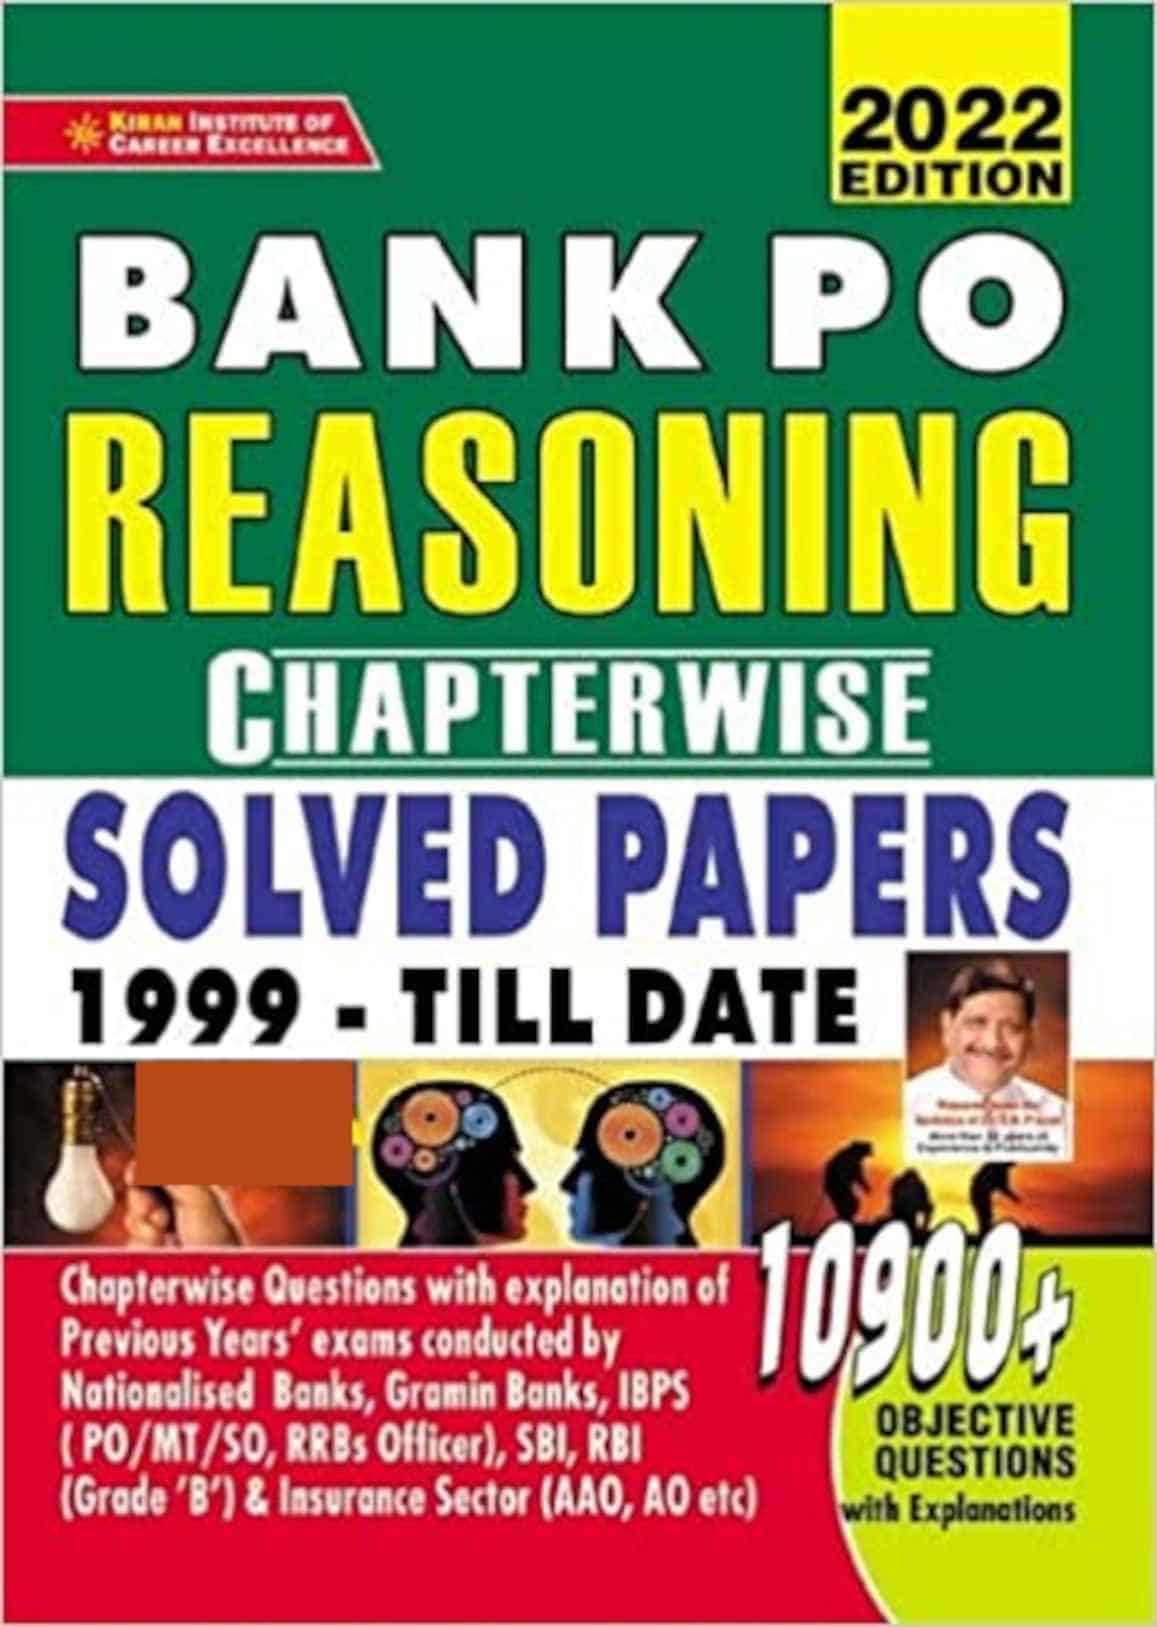 Kiran Bank PO Reasoning Chapterwise 10900+ Questions - 2022 Edition